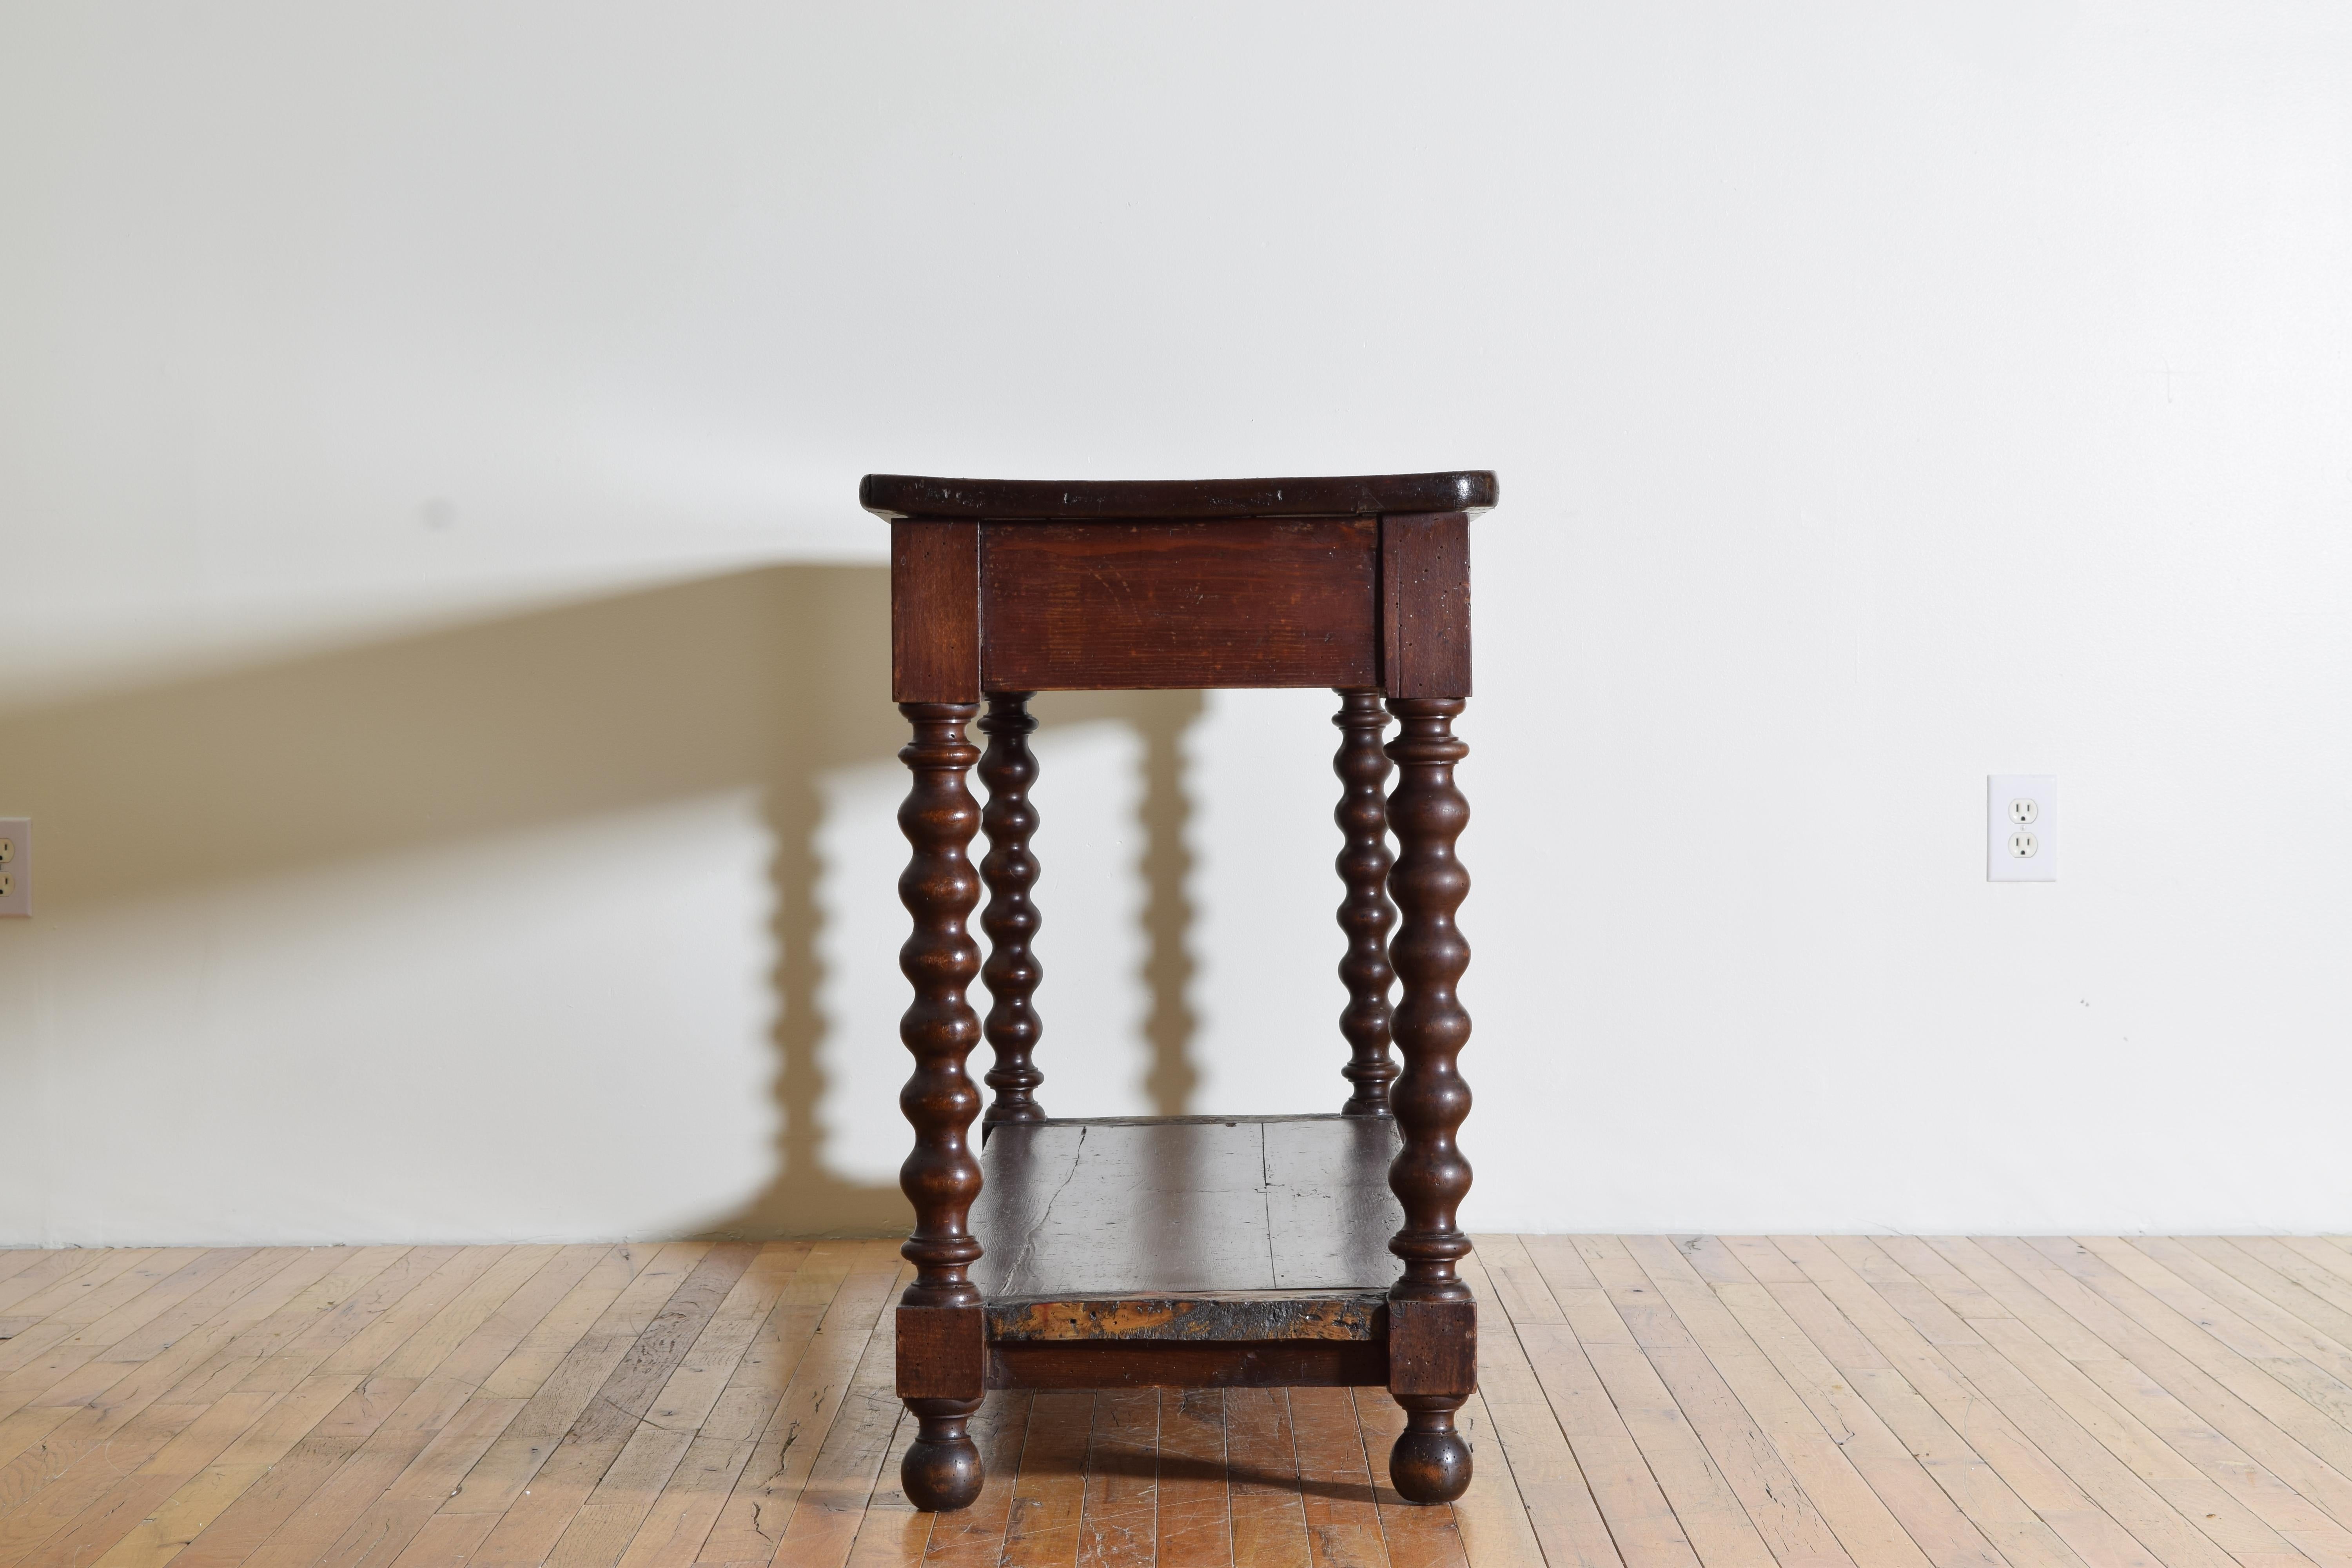 French Baroque Revival Period Turned Oak Sofa or Console Table, Mid-19th Century 1